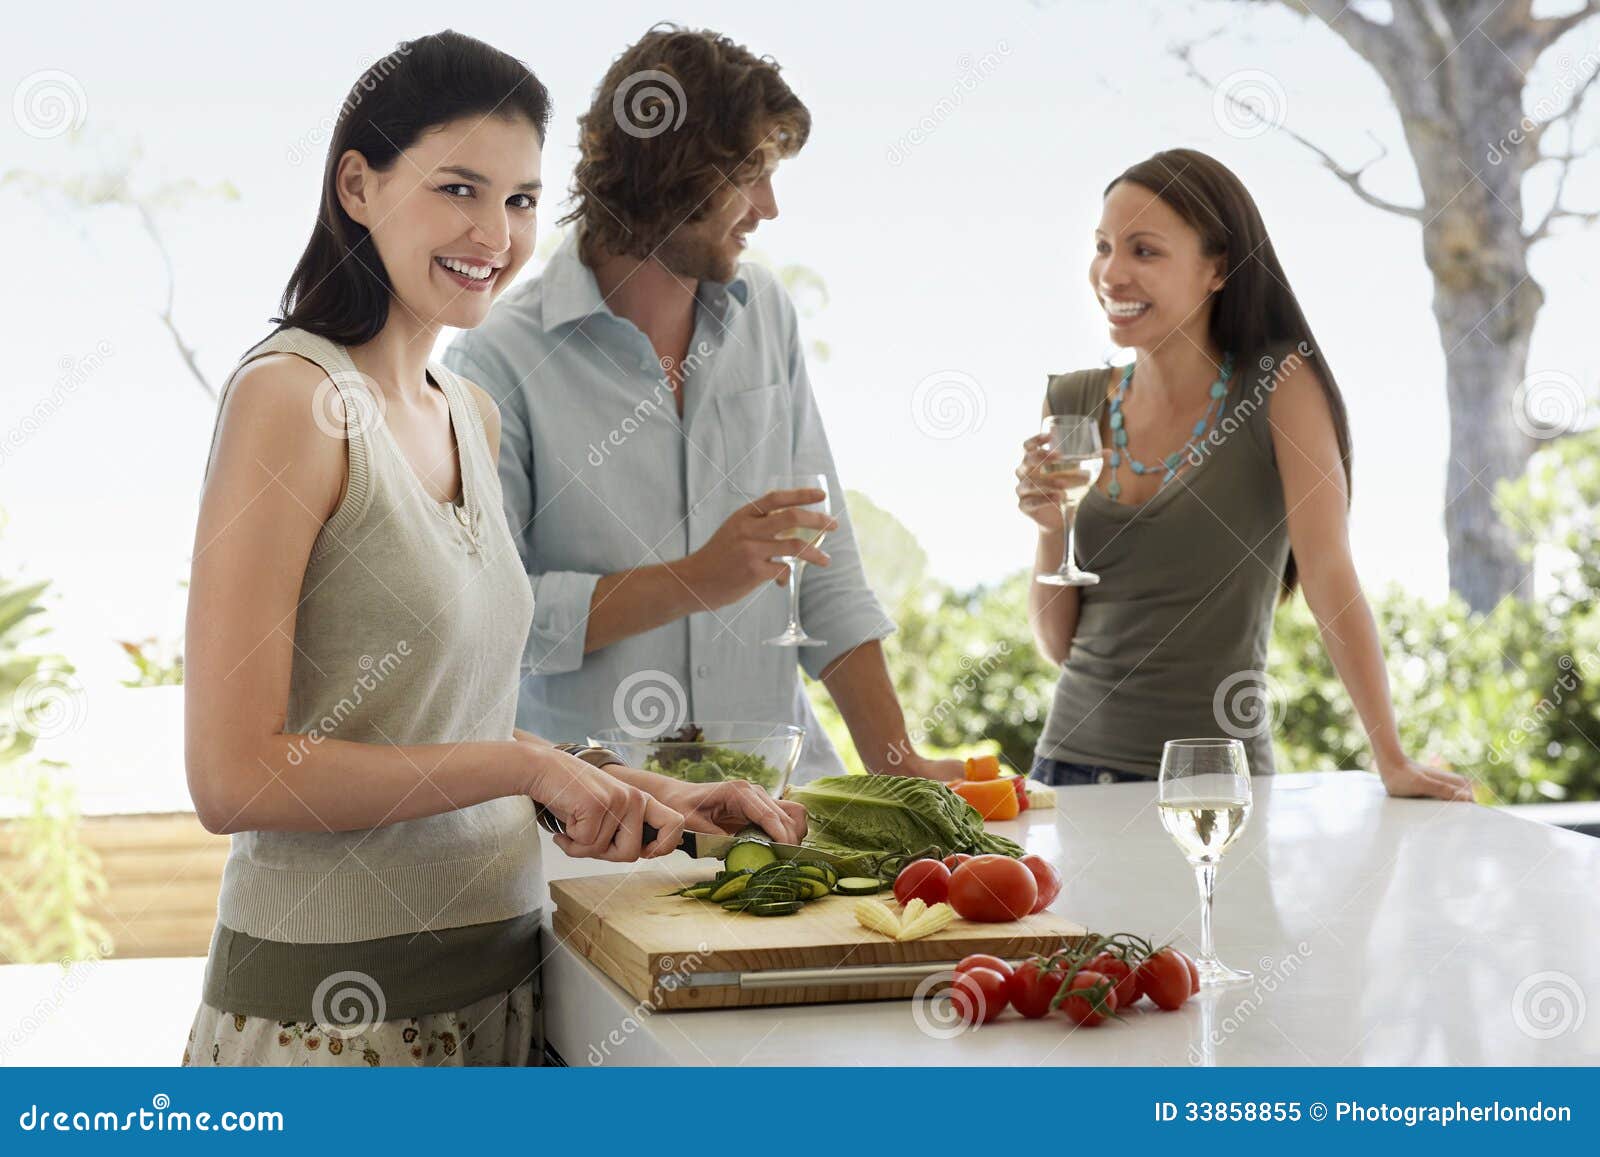 woman chopping vegetables with friends communicating at kitchen counter